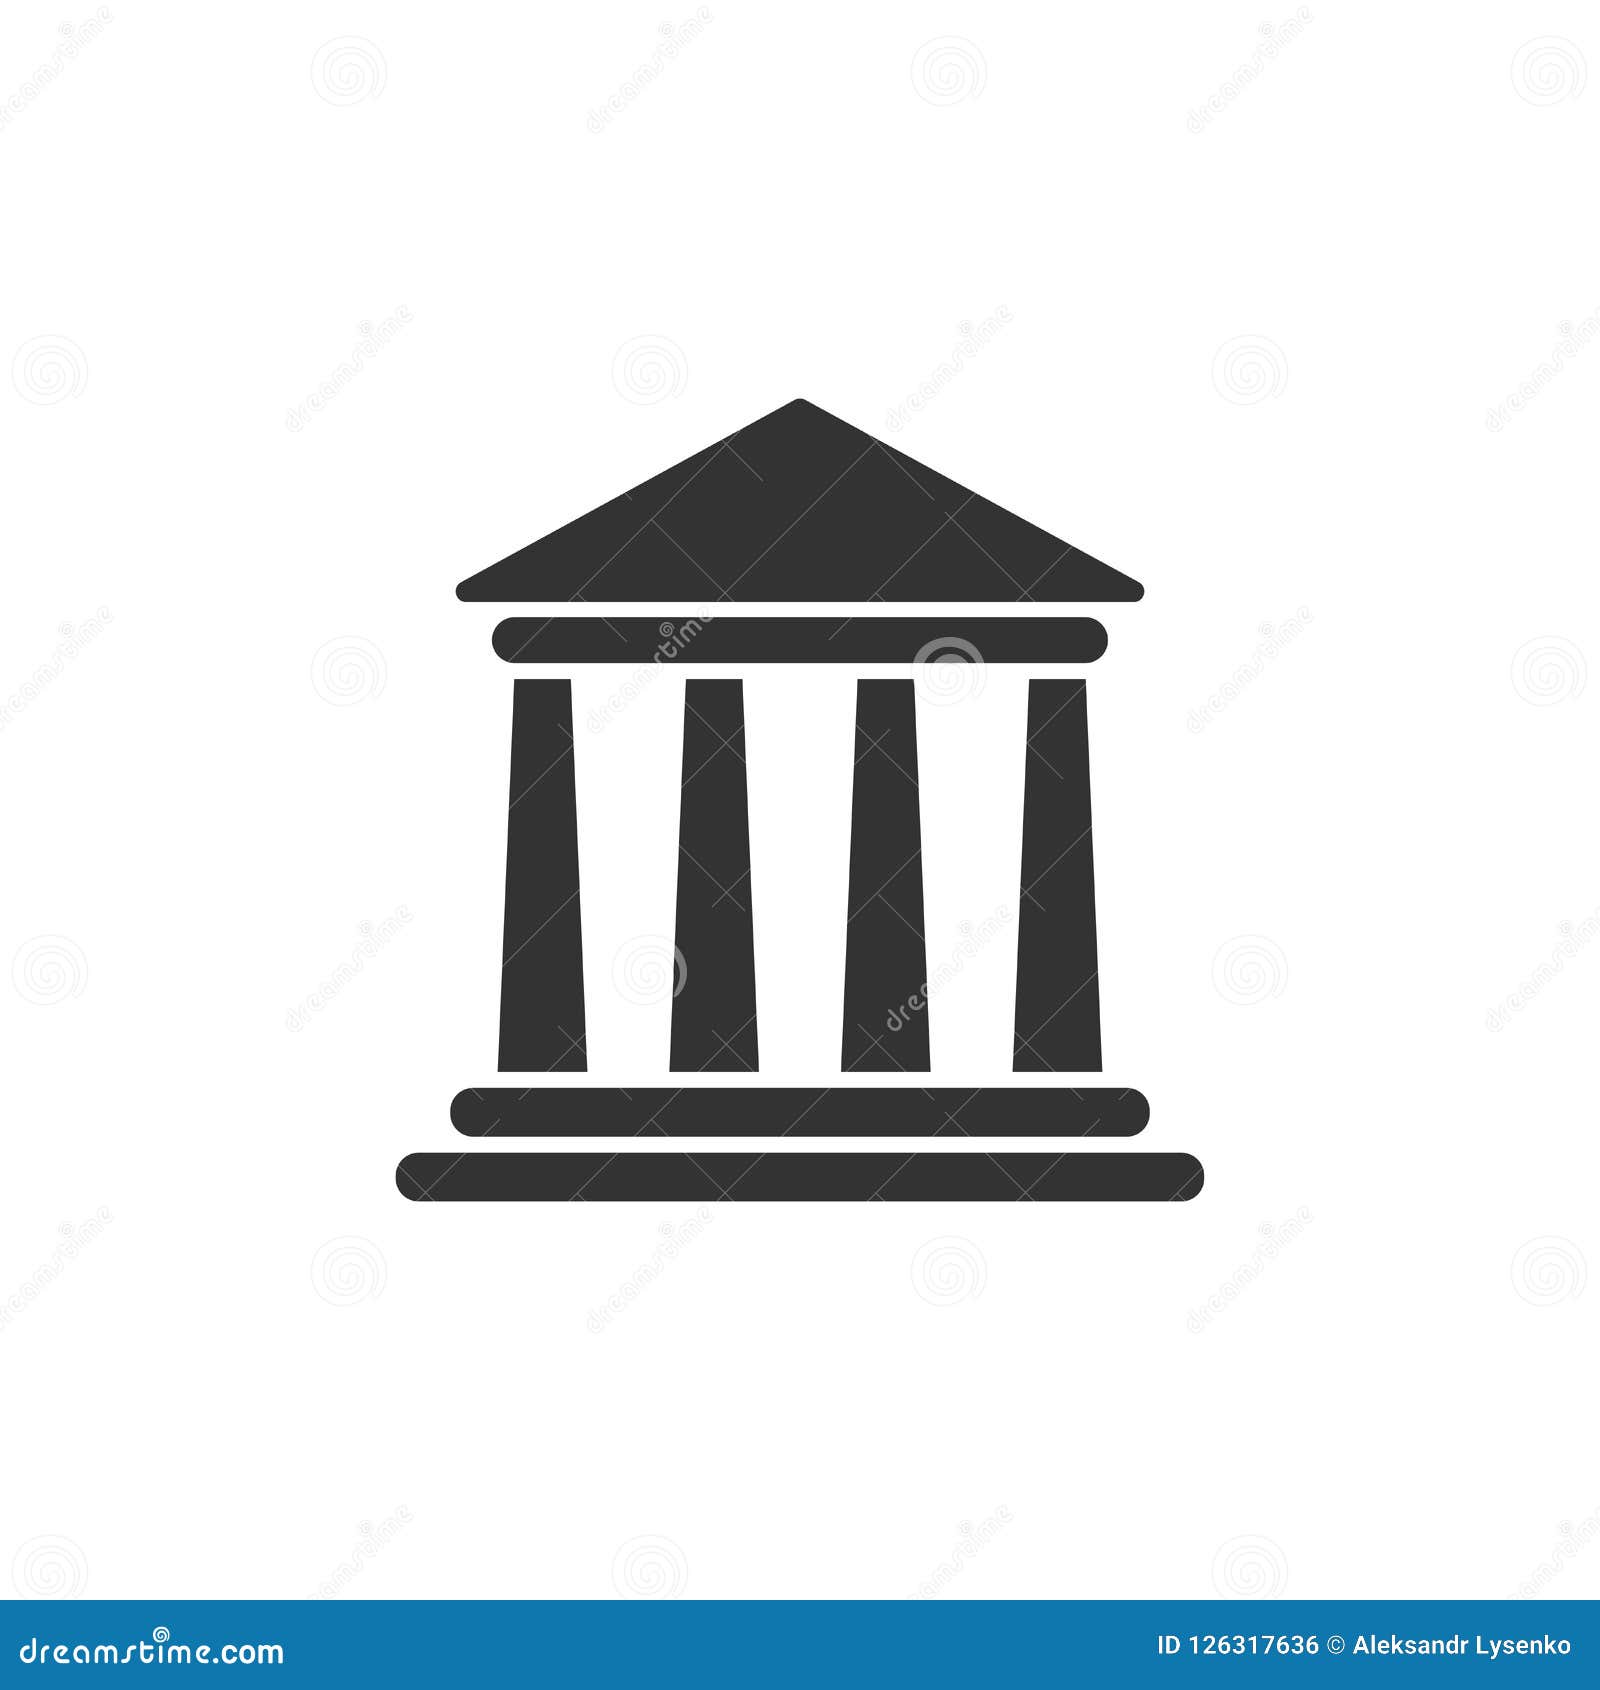 bank building icon in flat style. government architecture 